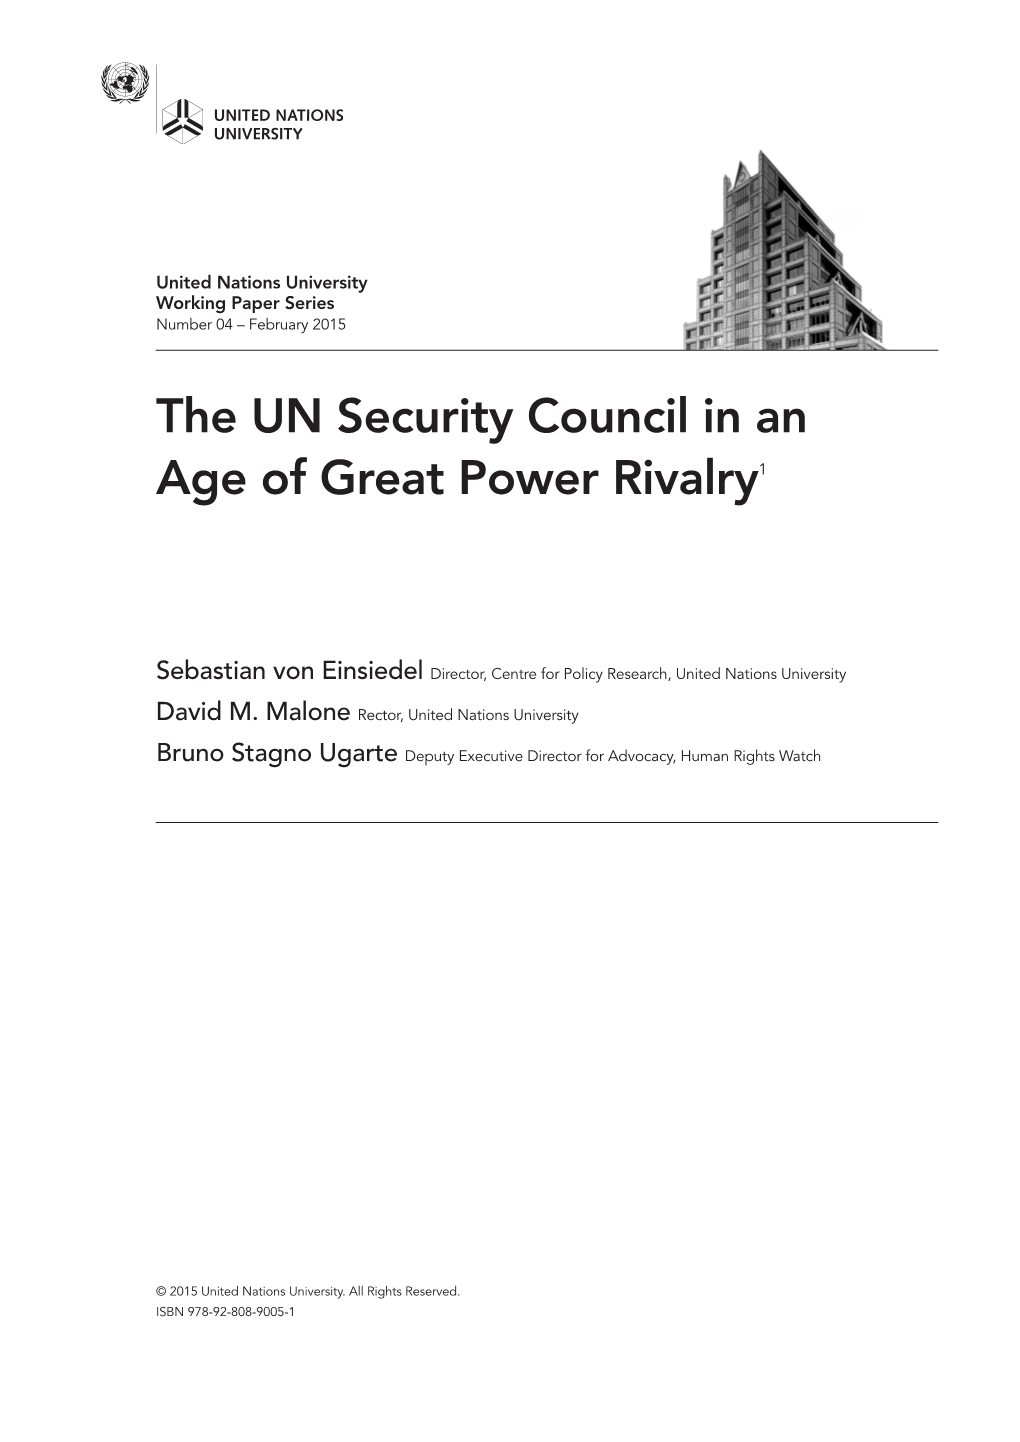 The UN Security Council in an Age of Great Power Rivalry1